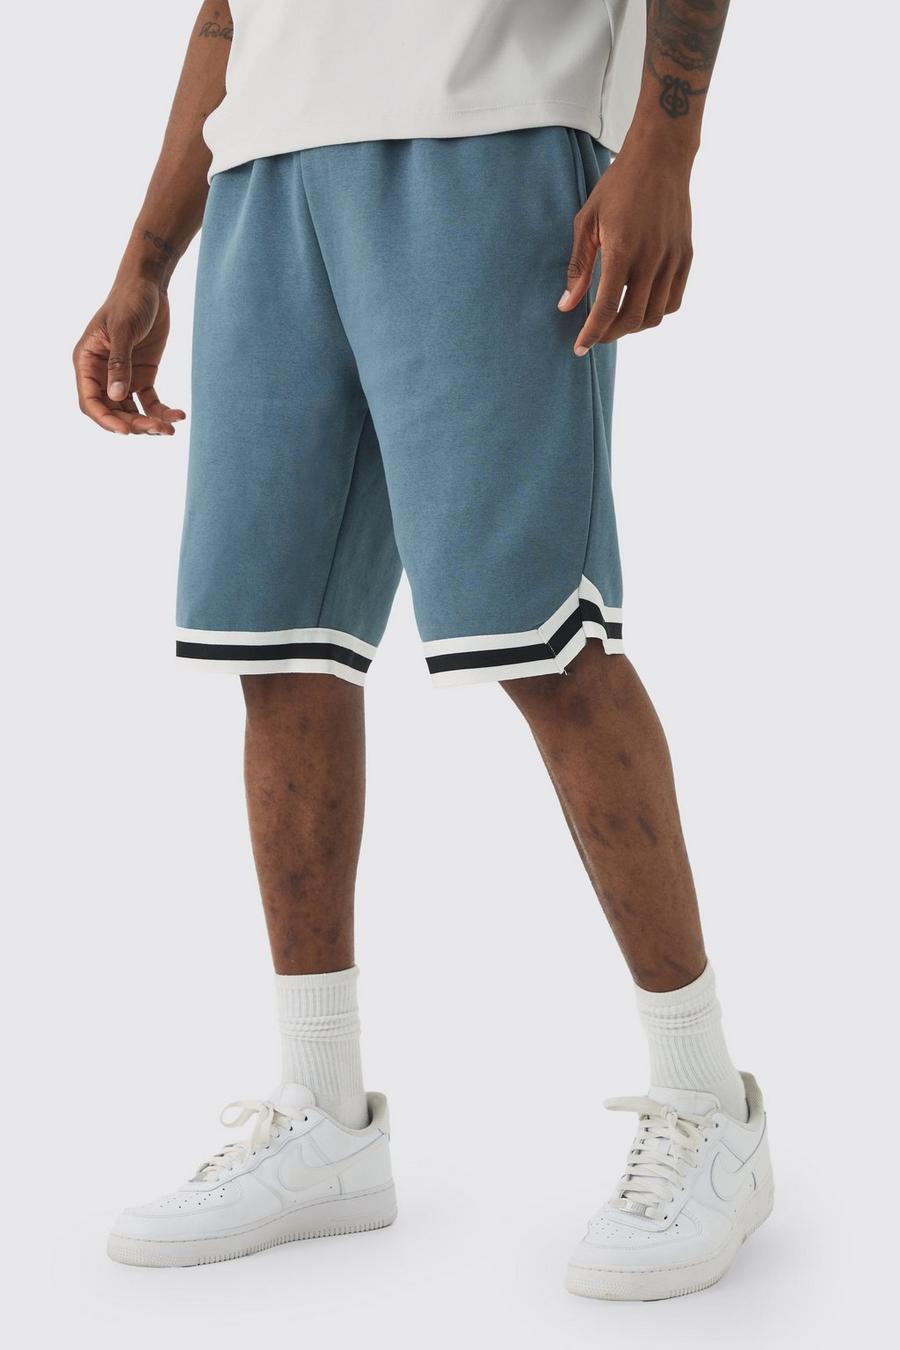 Tall Loose Fit Mid Length Basketball Short In Slate